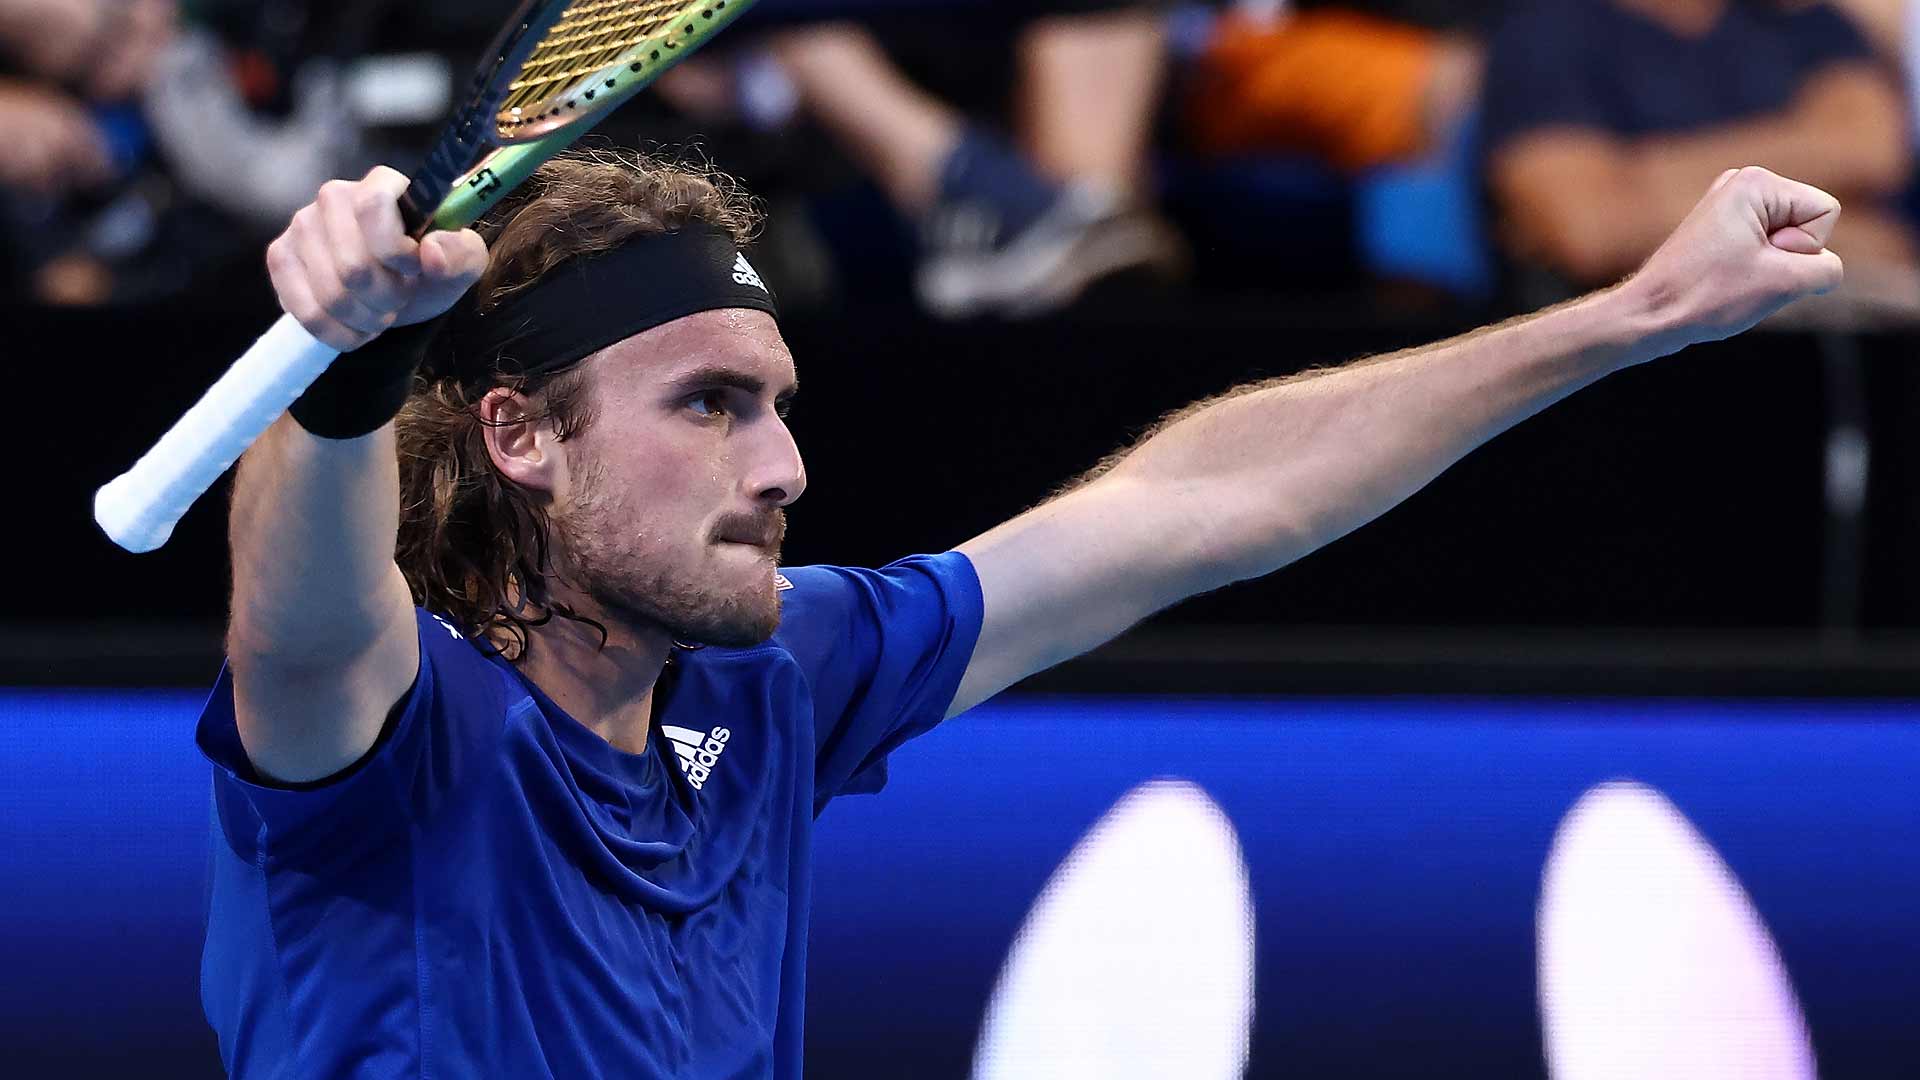 Stefanos Tsitsipas celebrates victory against David Goffin at the United Cup on Monday in Perth.